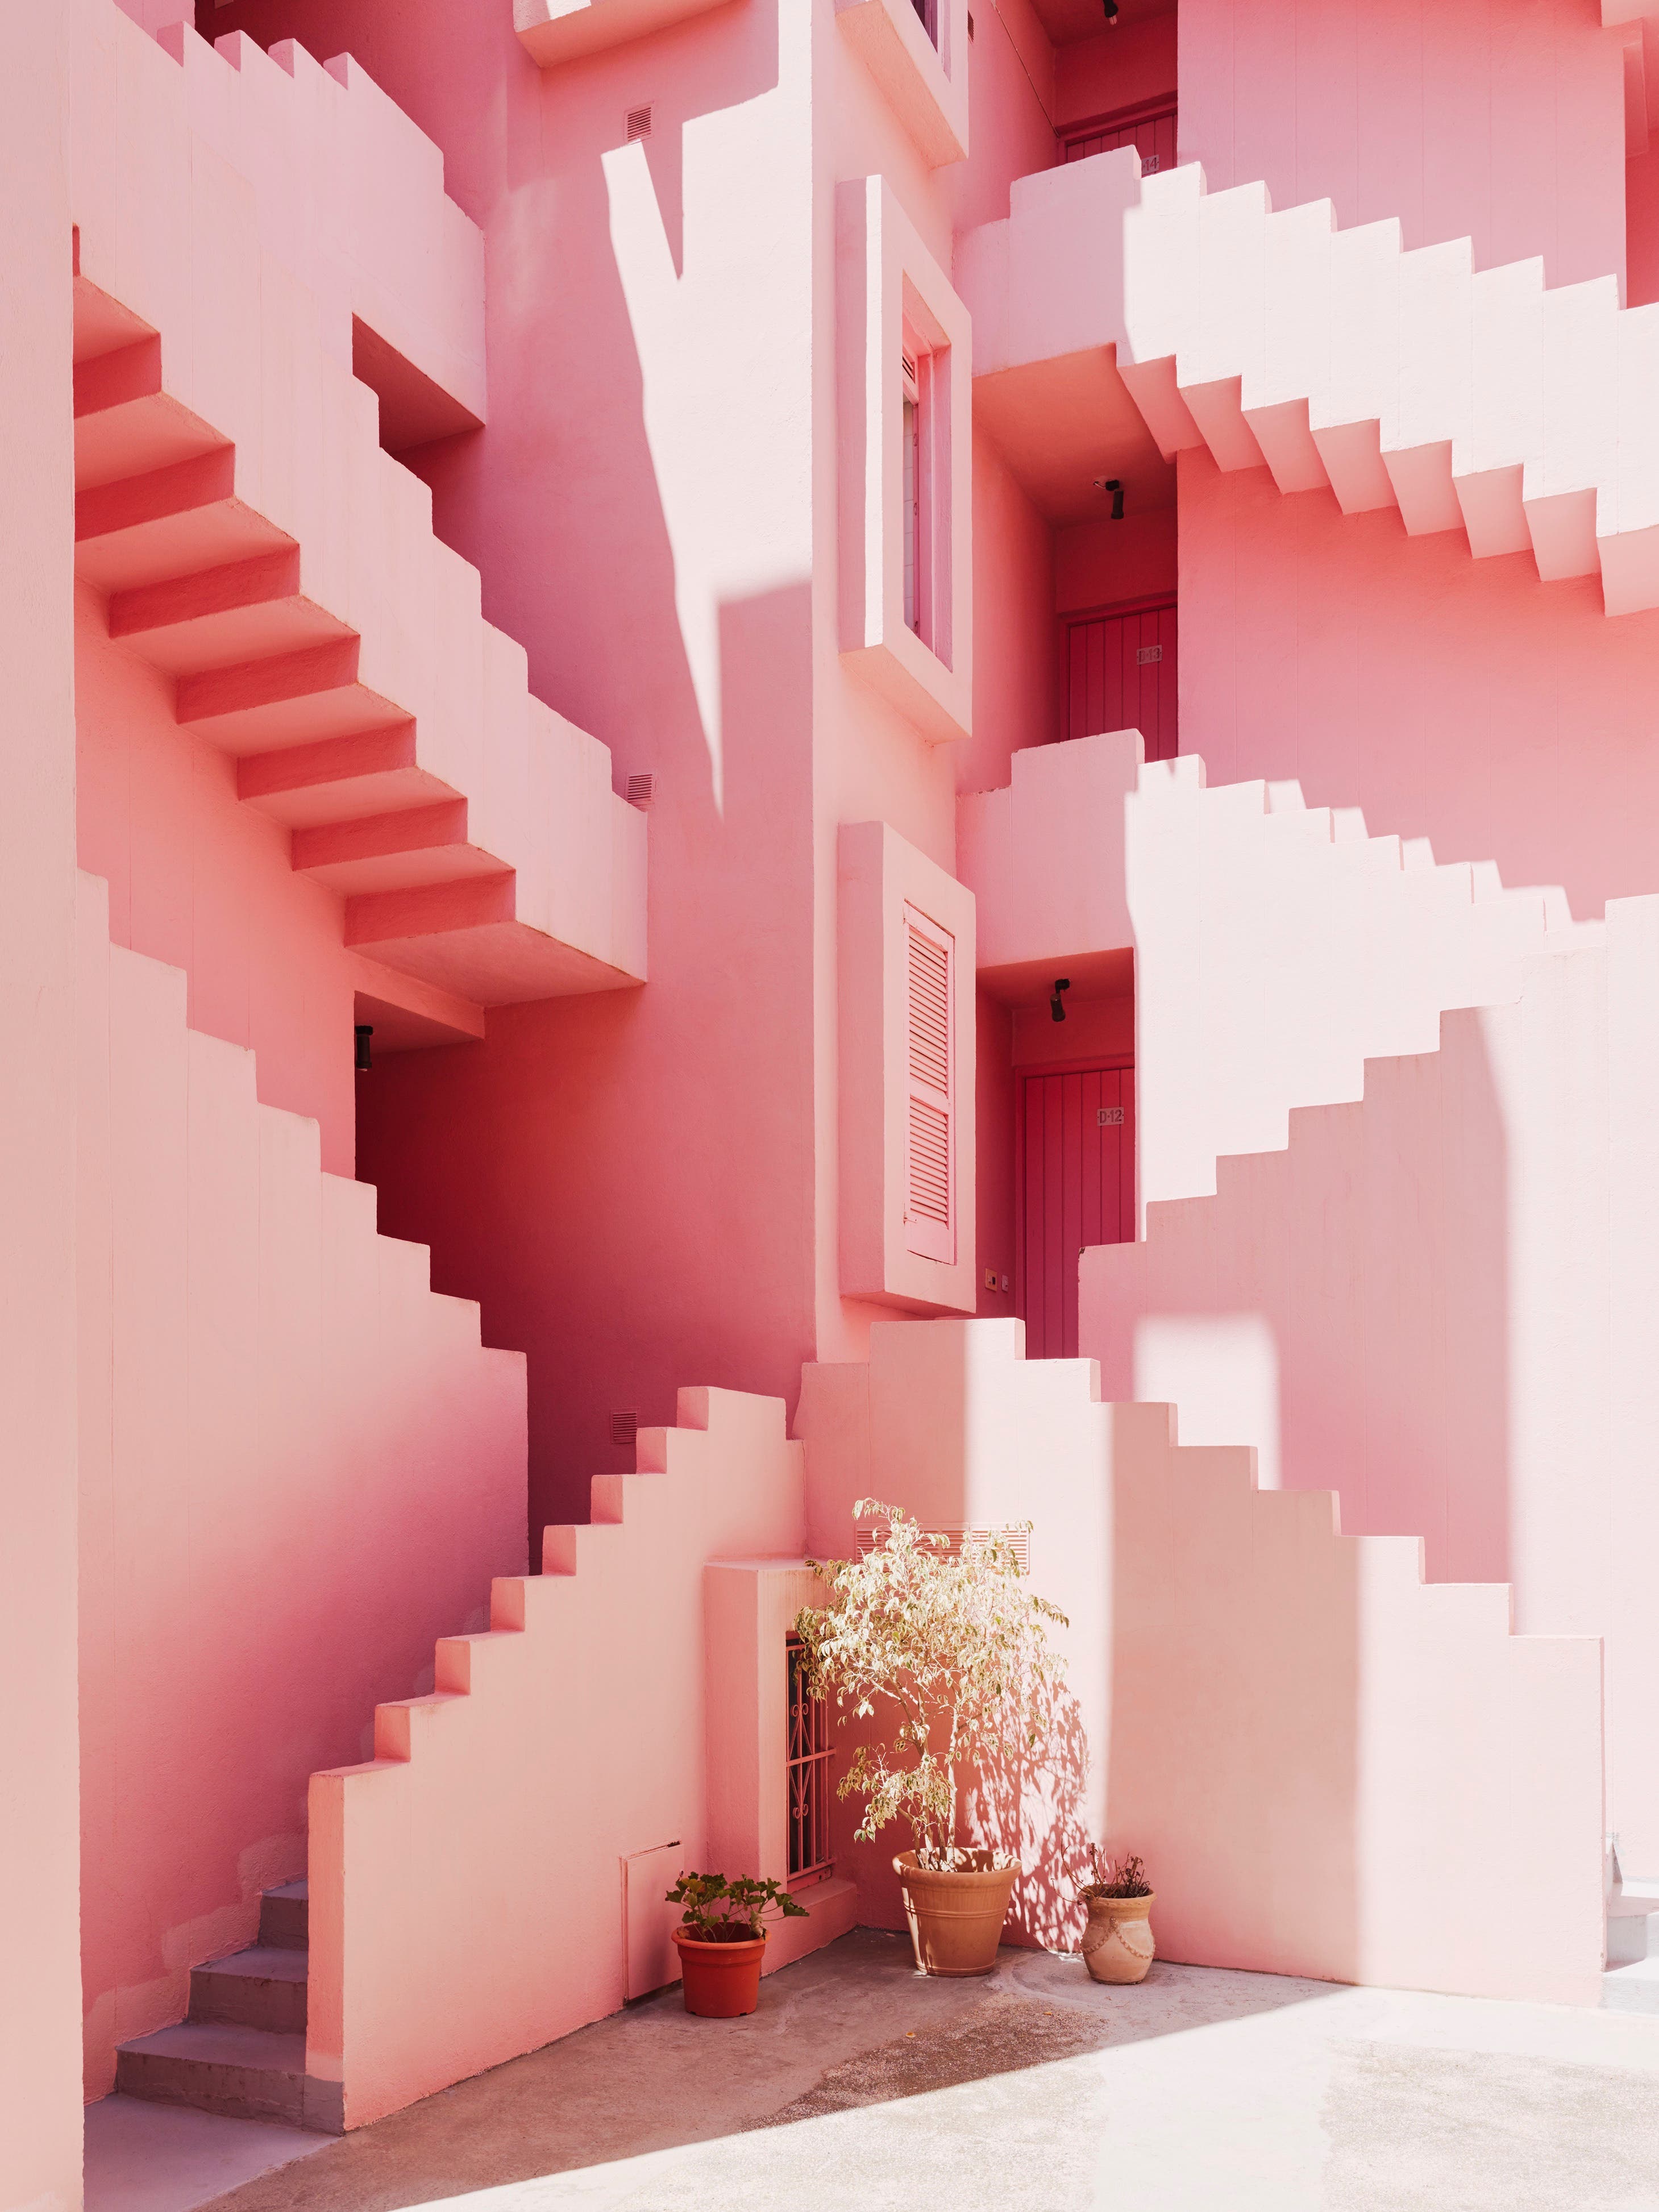 I Photograph the Most Colorful Buildings in the World—These 5 Belong on Your Bucket List